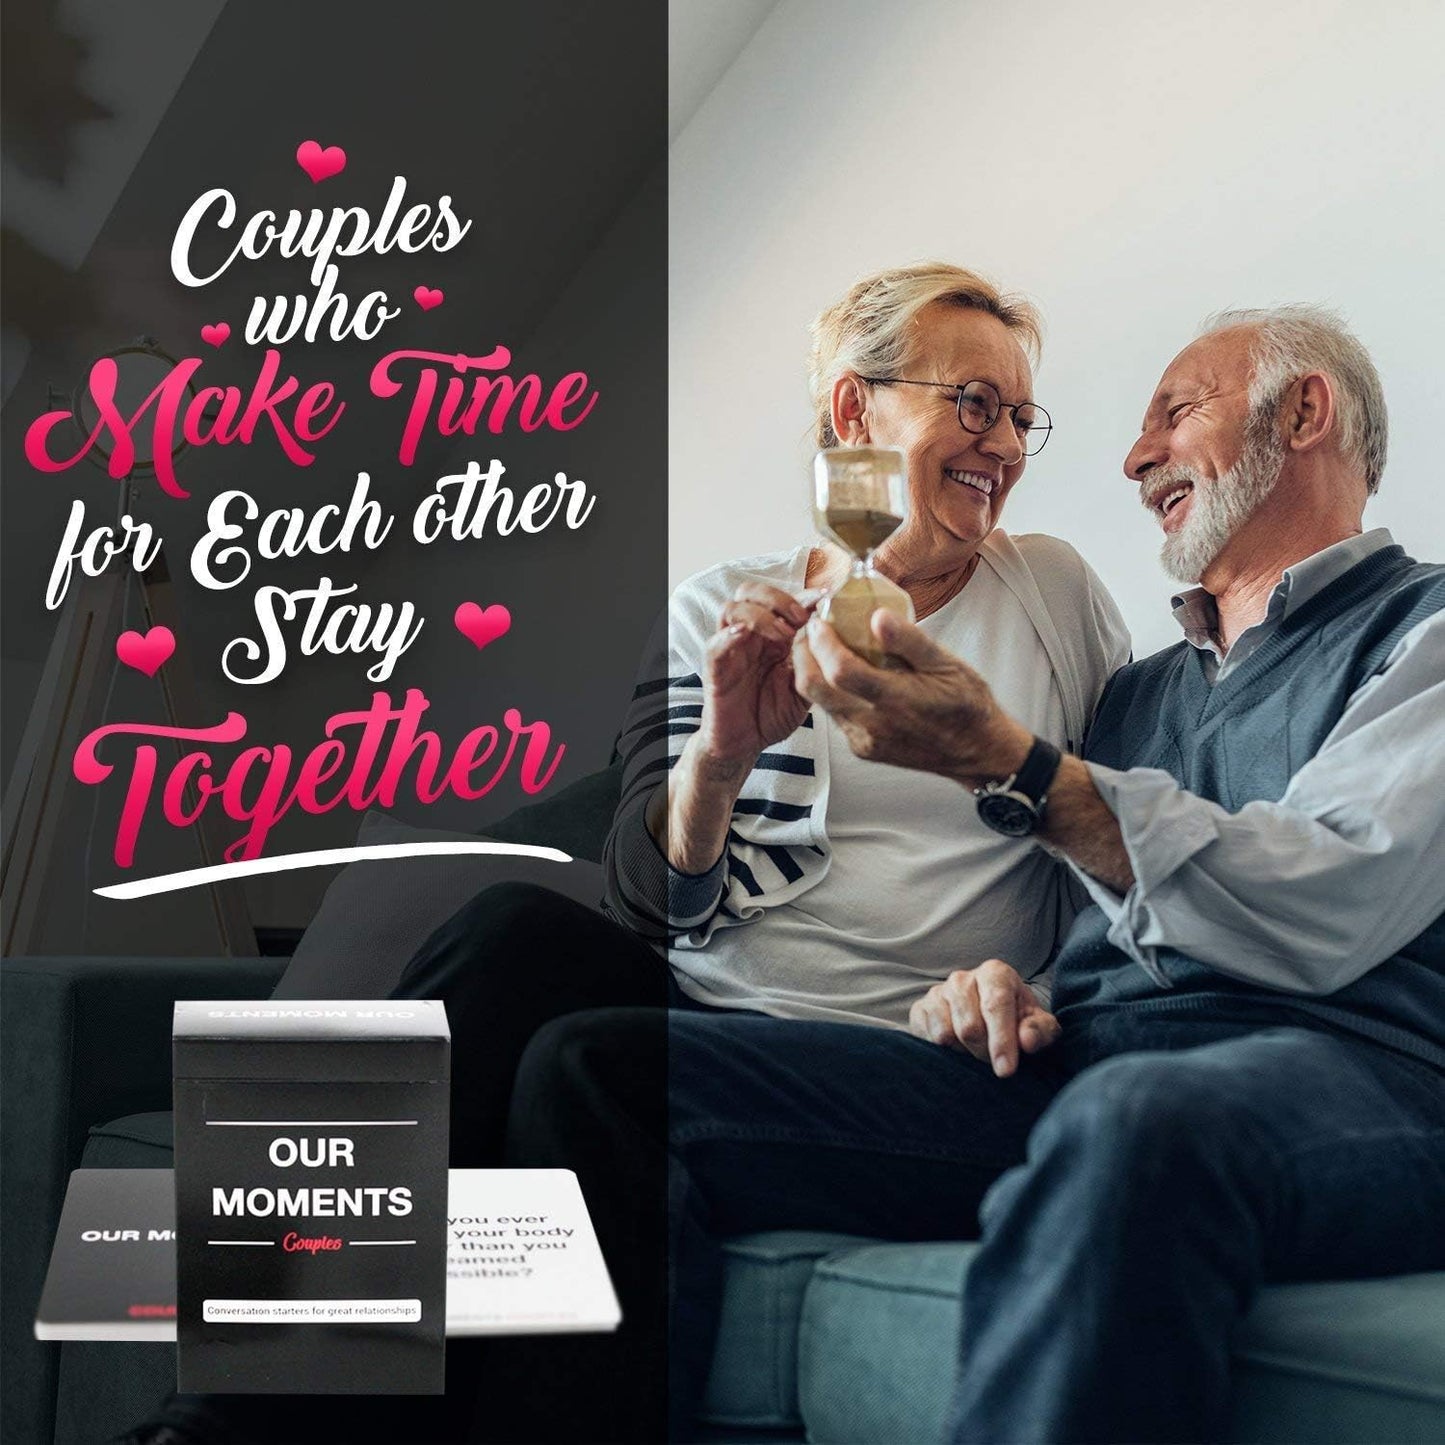 A card game for couples called, 'Our Moments Couples"